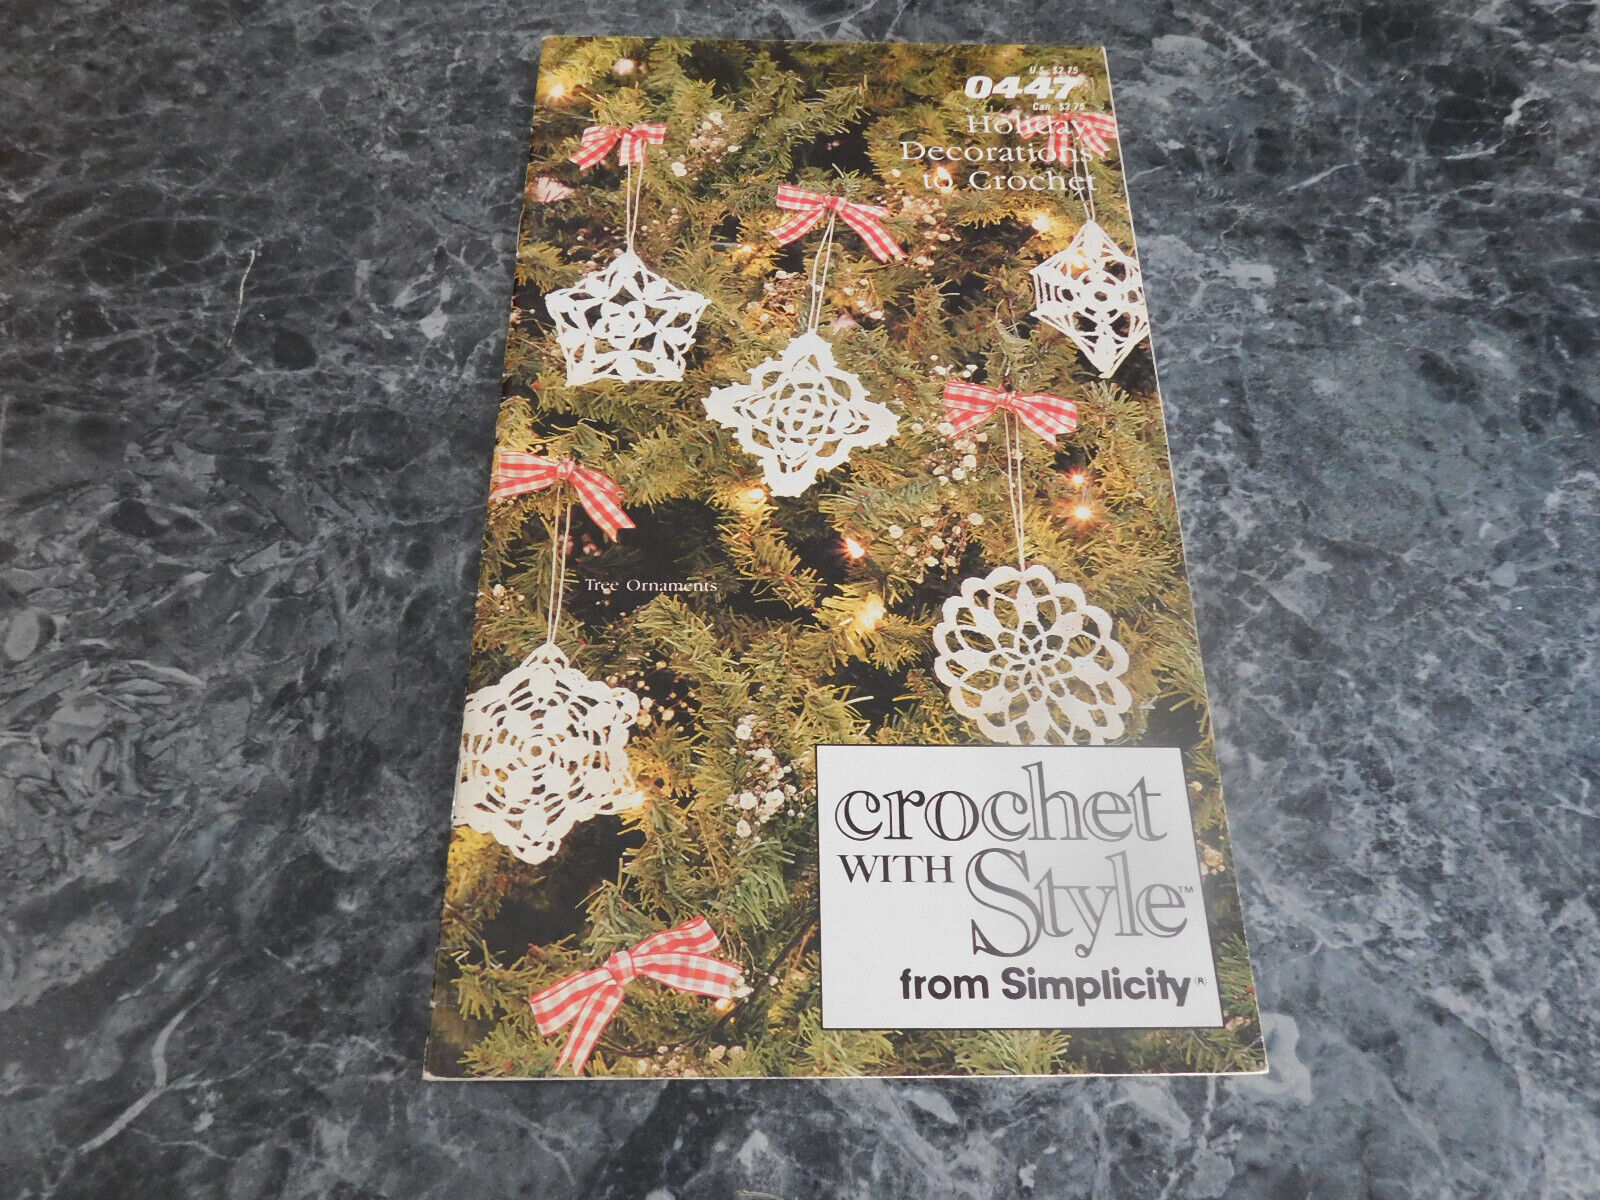 Holiday Decorations to Crochet by Simplicity #447 - $4.99